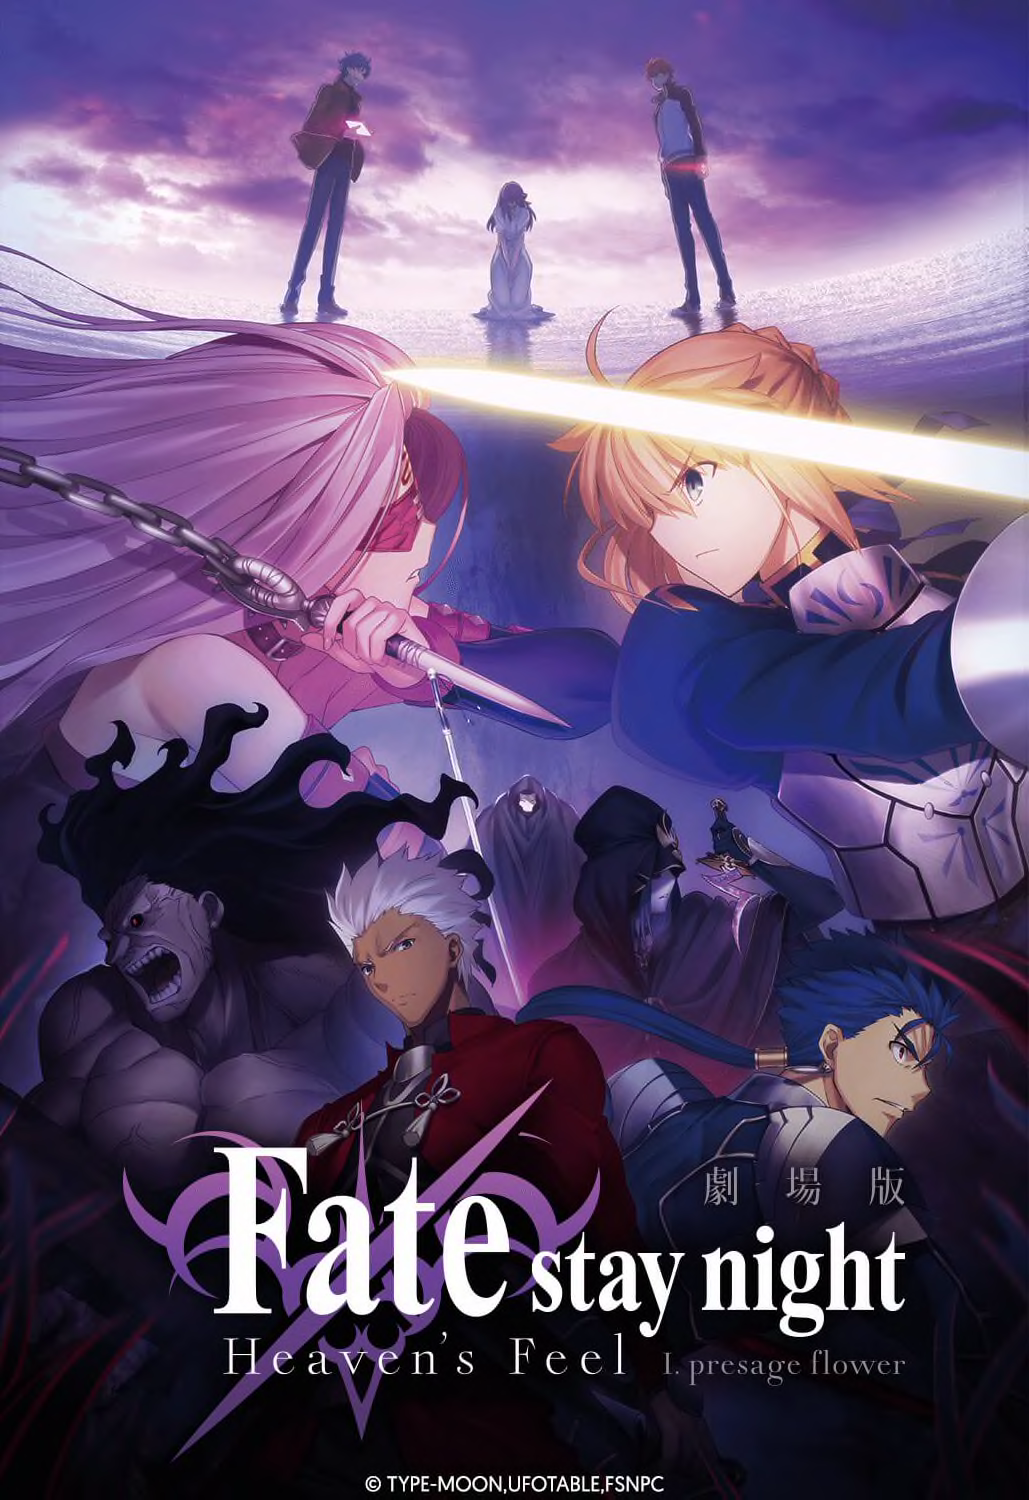 Infos - Fate/stay night Movie: Heaven's Feel - I. Presage Flower - Anime  streaming in English sub, in HD and legally on Wakanim.tv